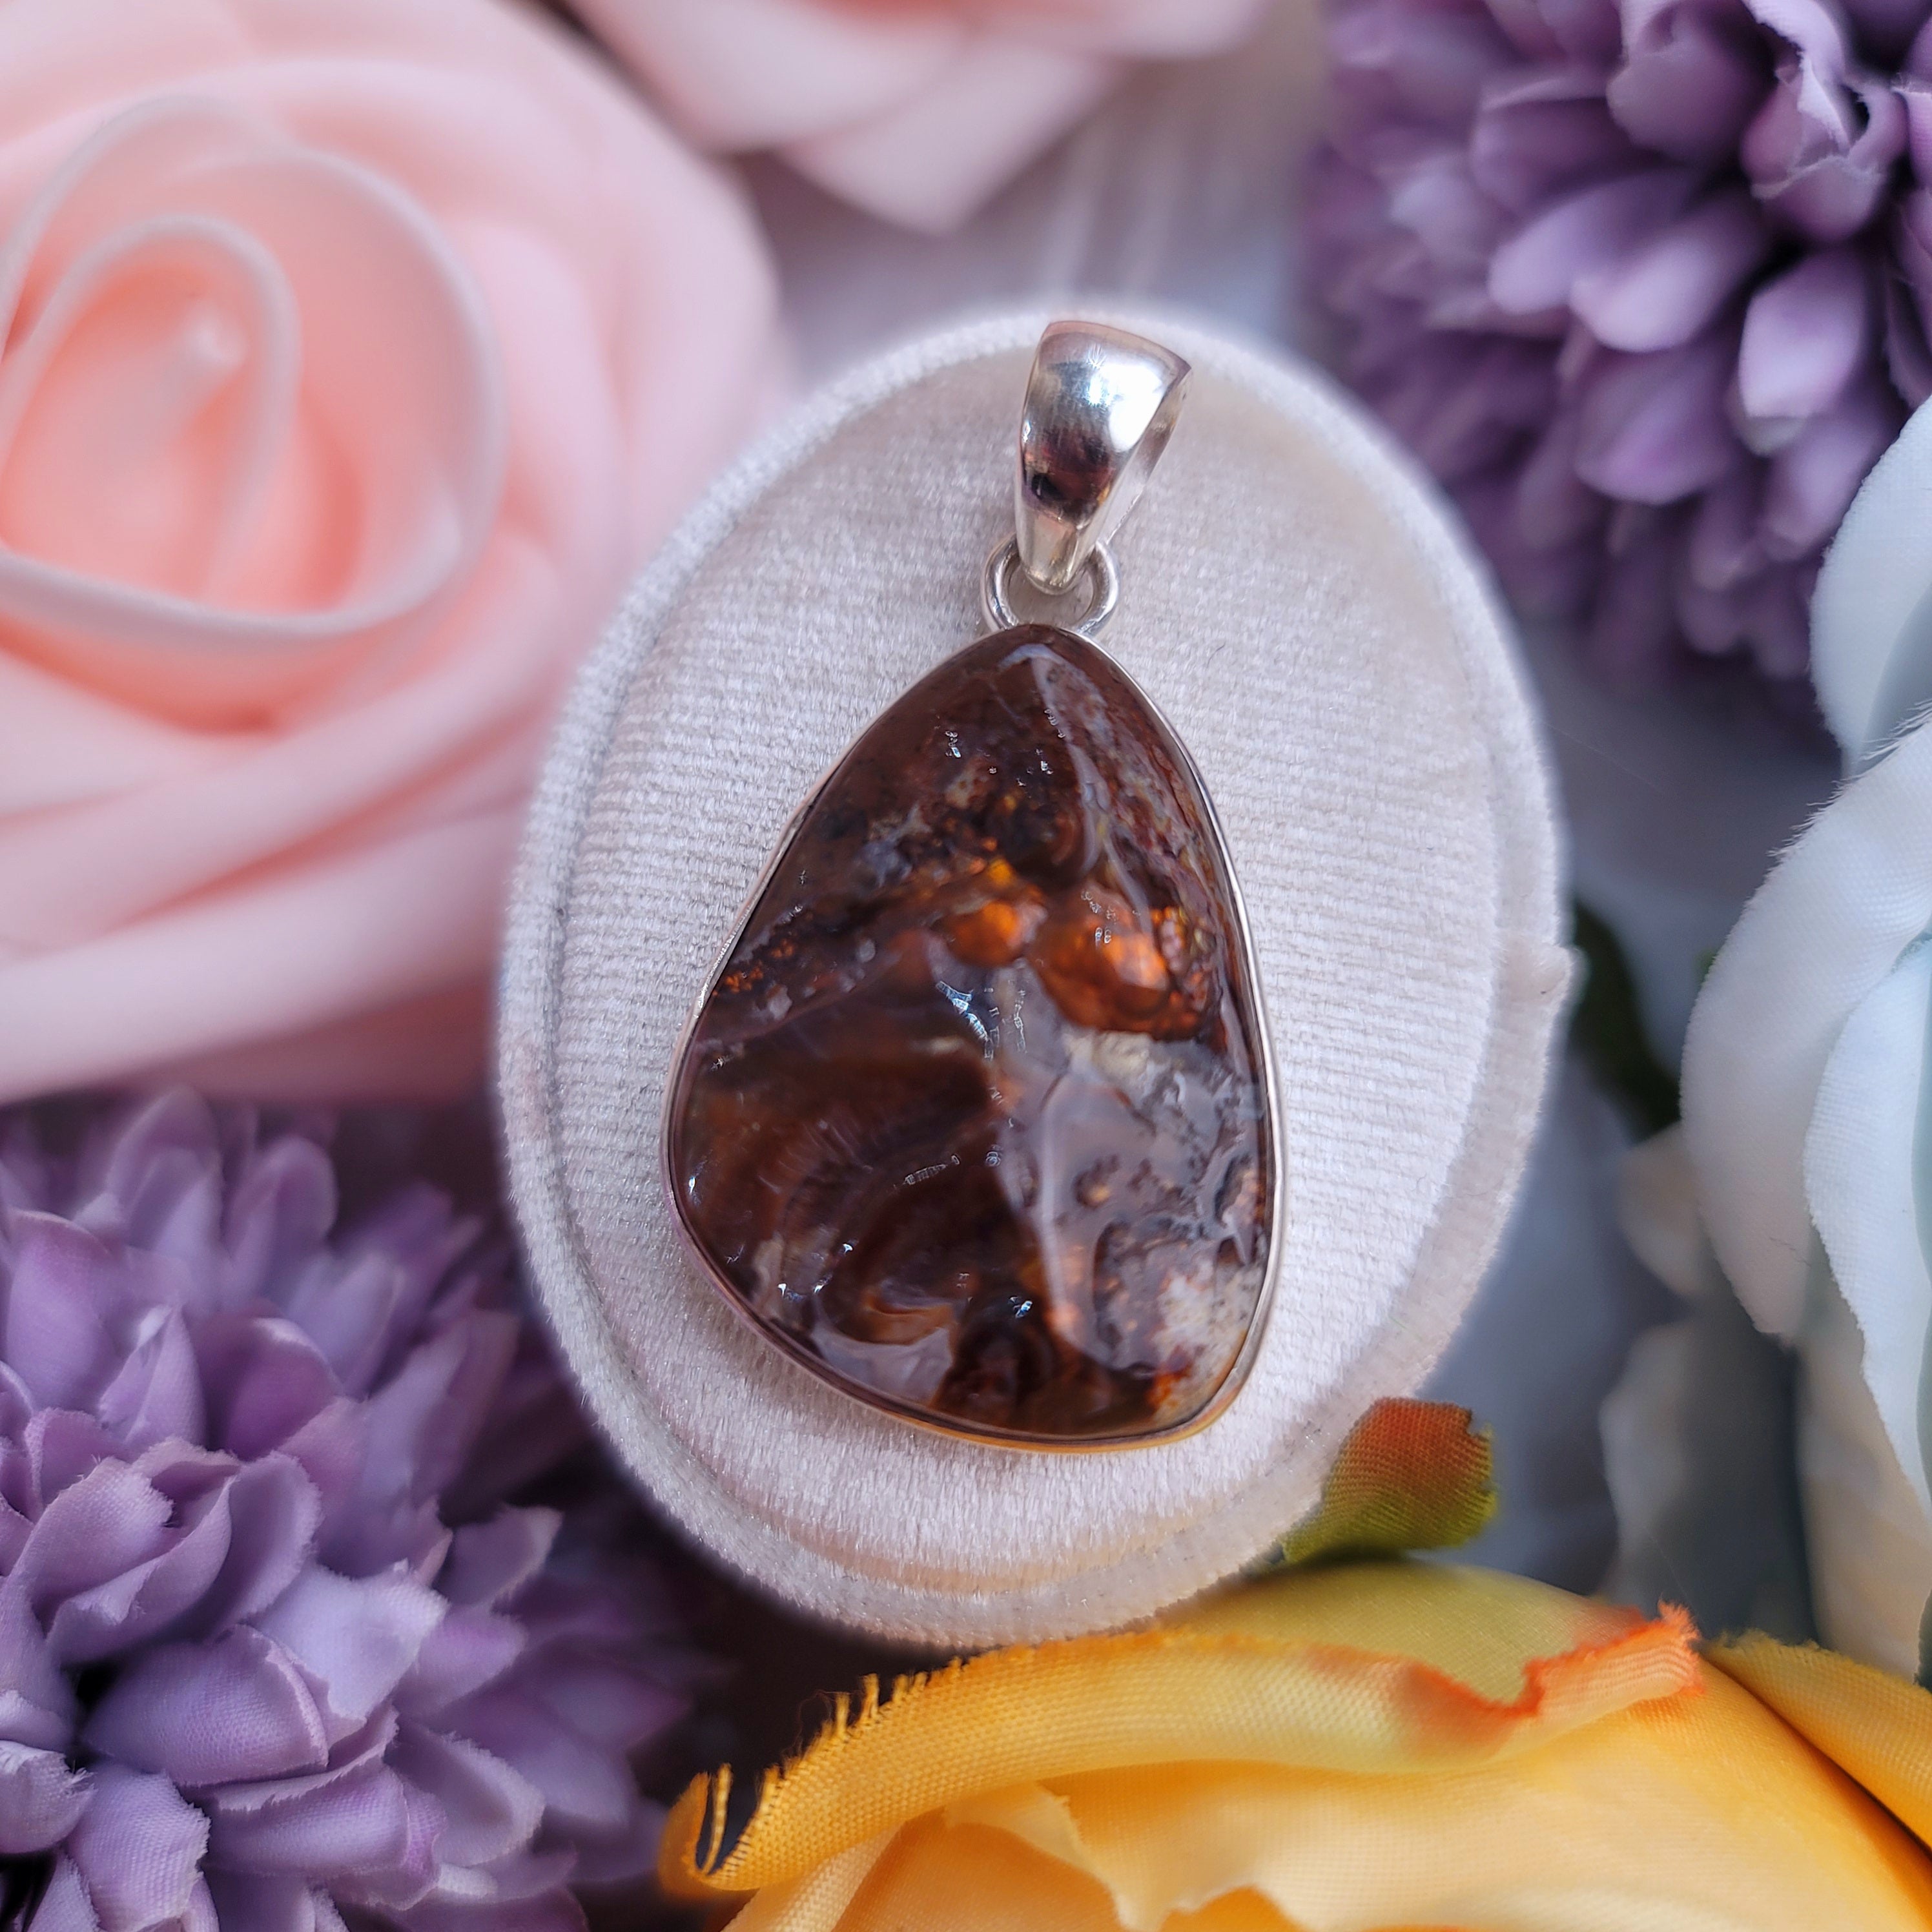 Fire Agate Pendant for Emotional Support, Joy and Self Worth